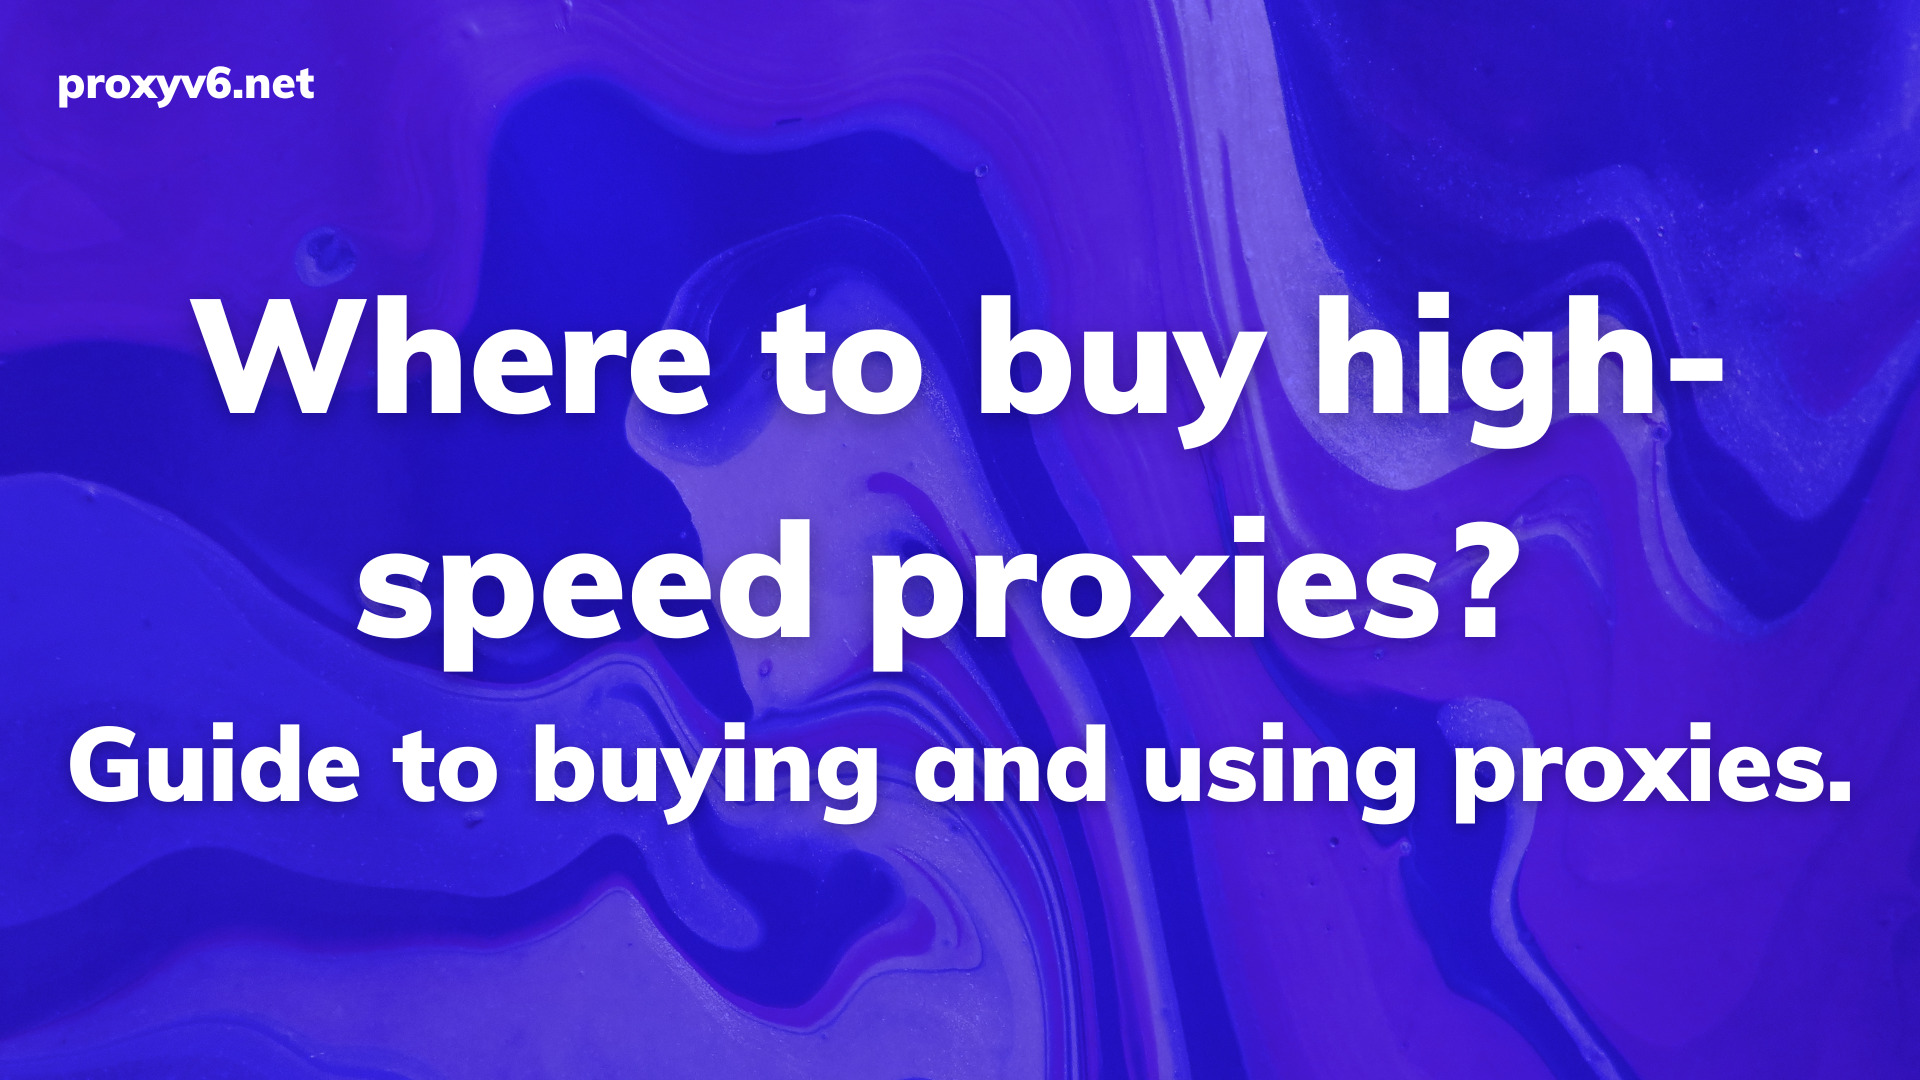 Where to buy high-speed proxies? Guide to buying and using proxies